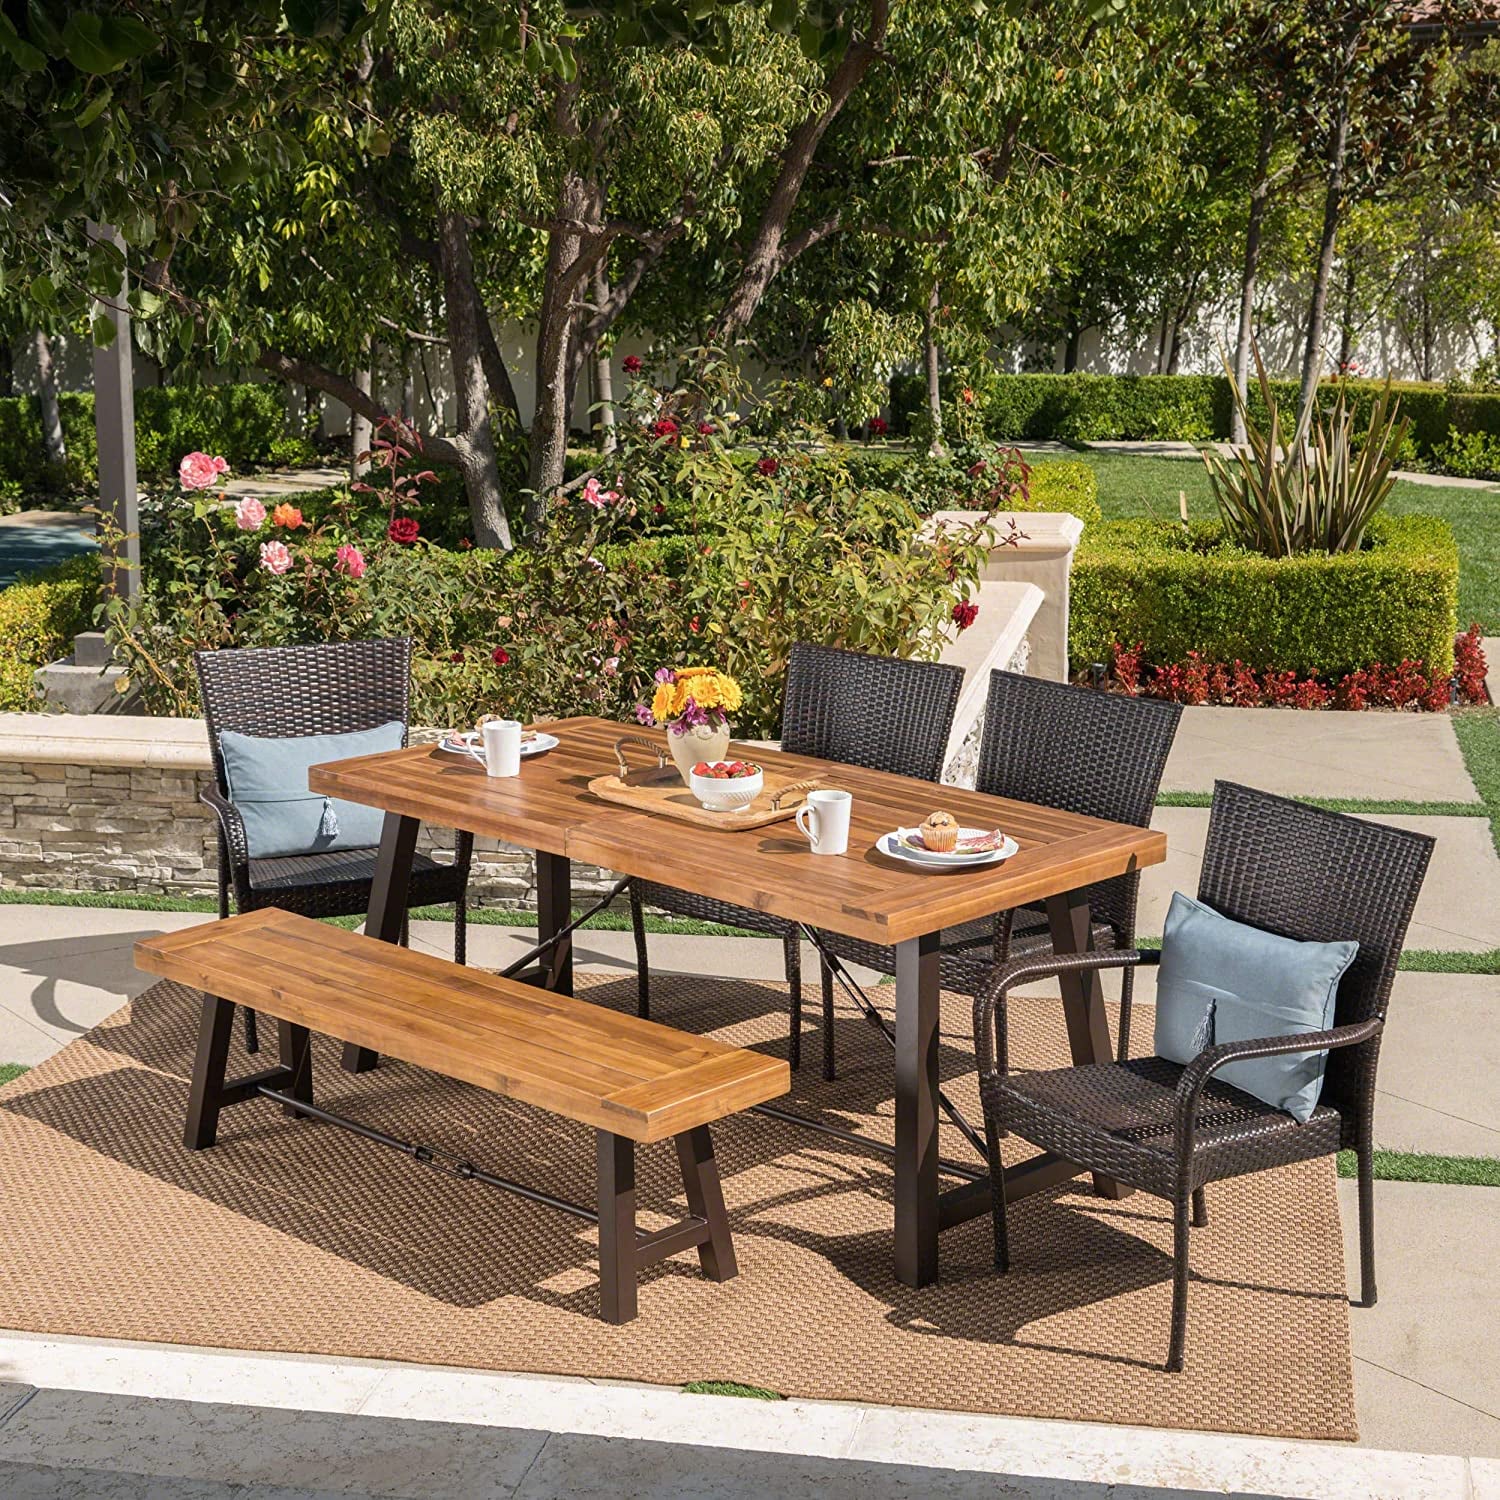 Patio Christopher Knight Home Salla Outdoor Acacia Wood Dining Set The Best Amazon Prime Day Home And Furniture Deals Of 22 Popsugar Home Photo 43